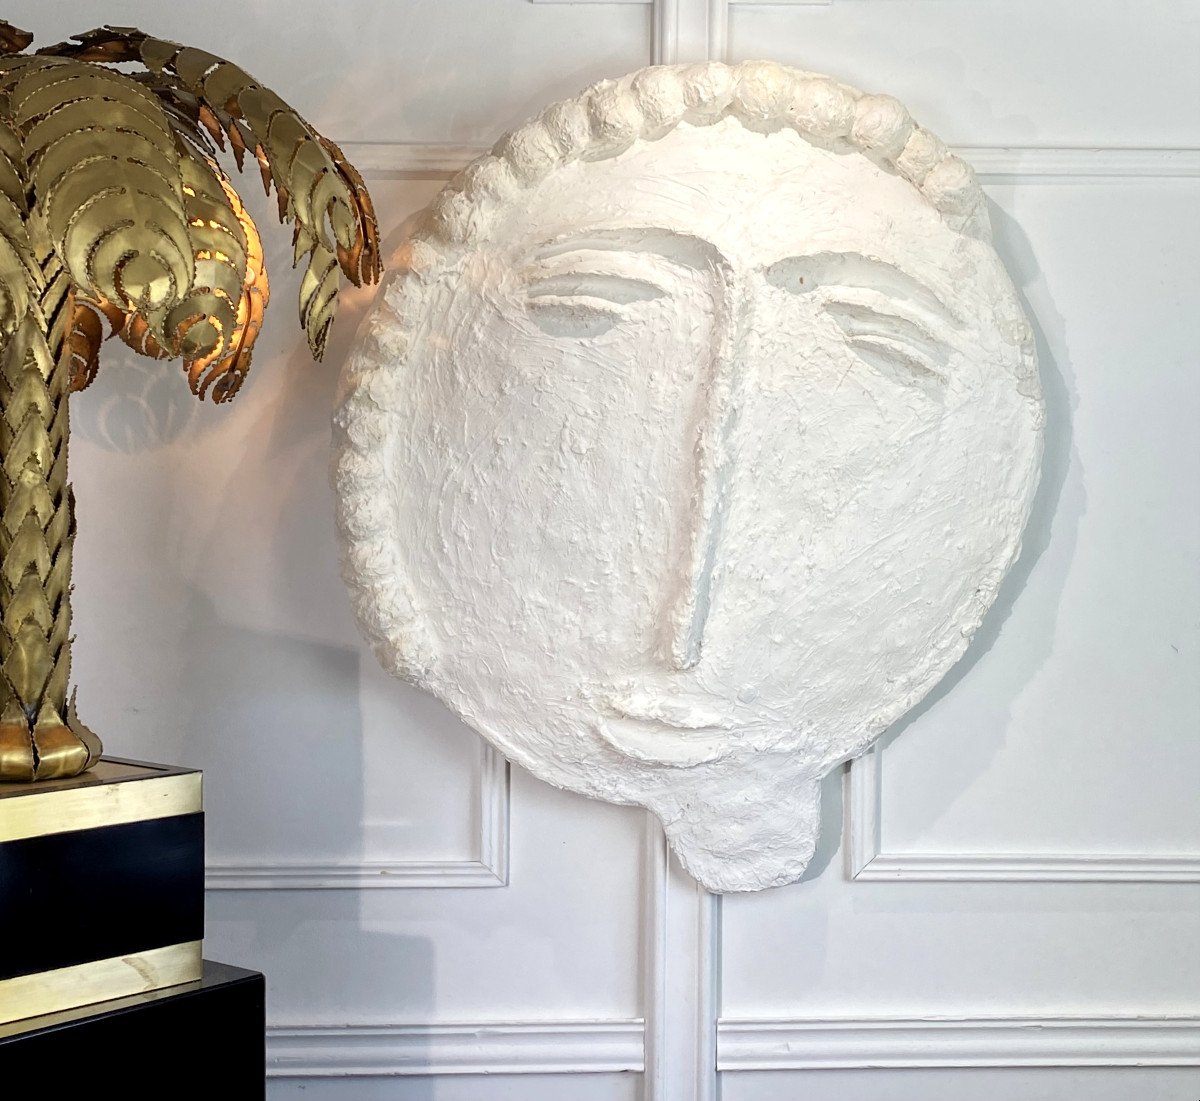 Stucco Sculpture Of "philippe Valentin" The Moon In The Spirit Of Jean Cocteau-photo-2